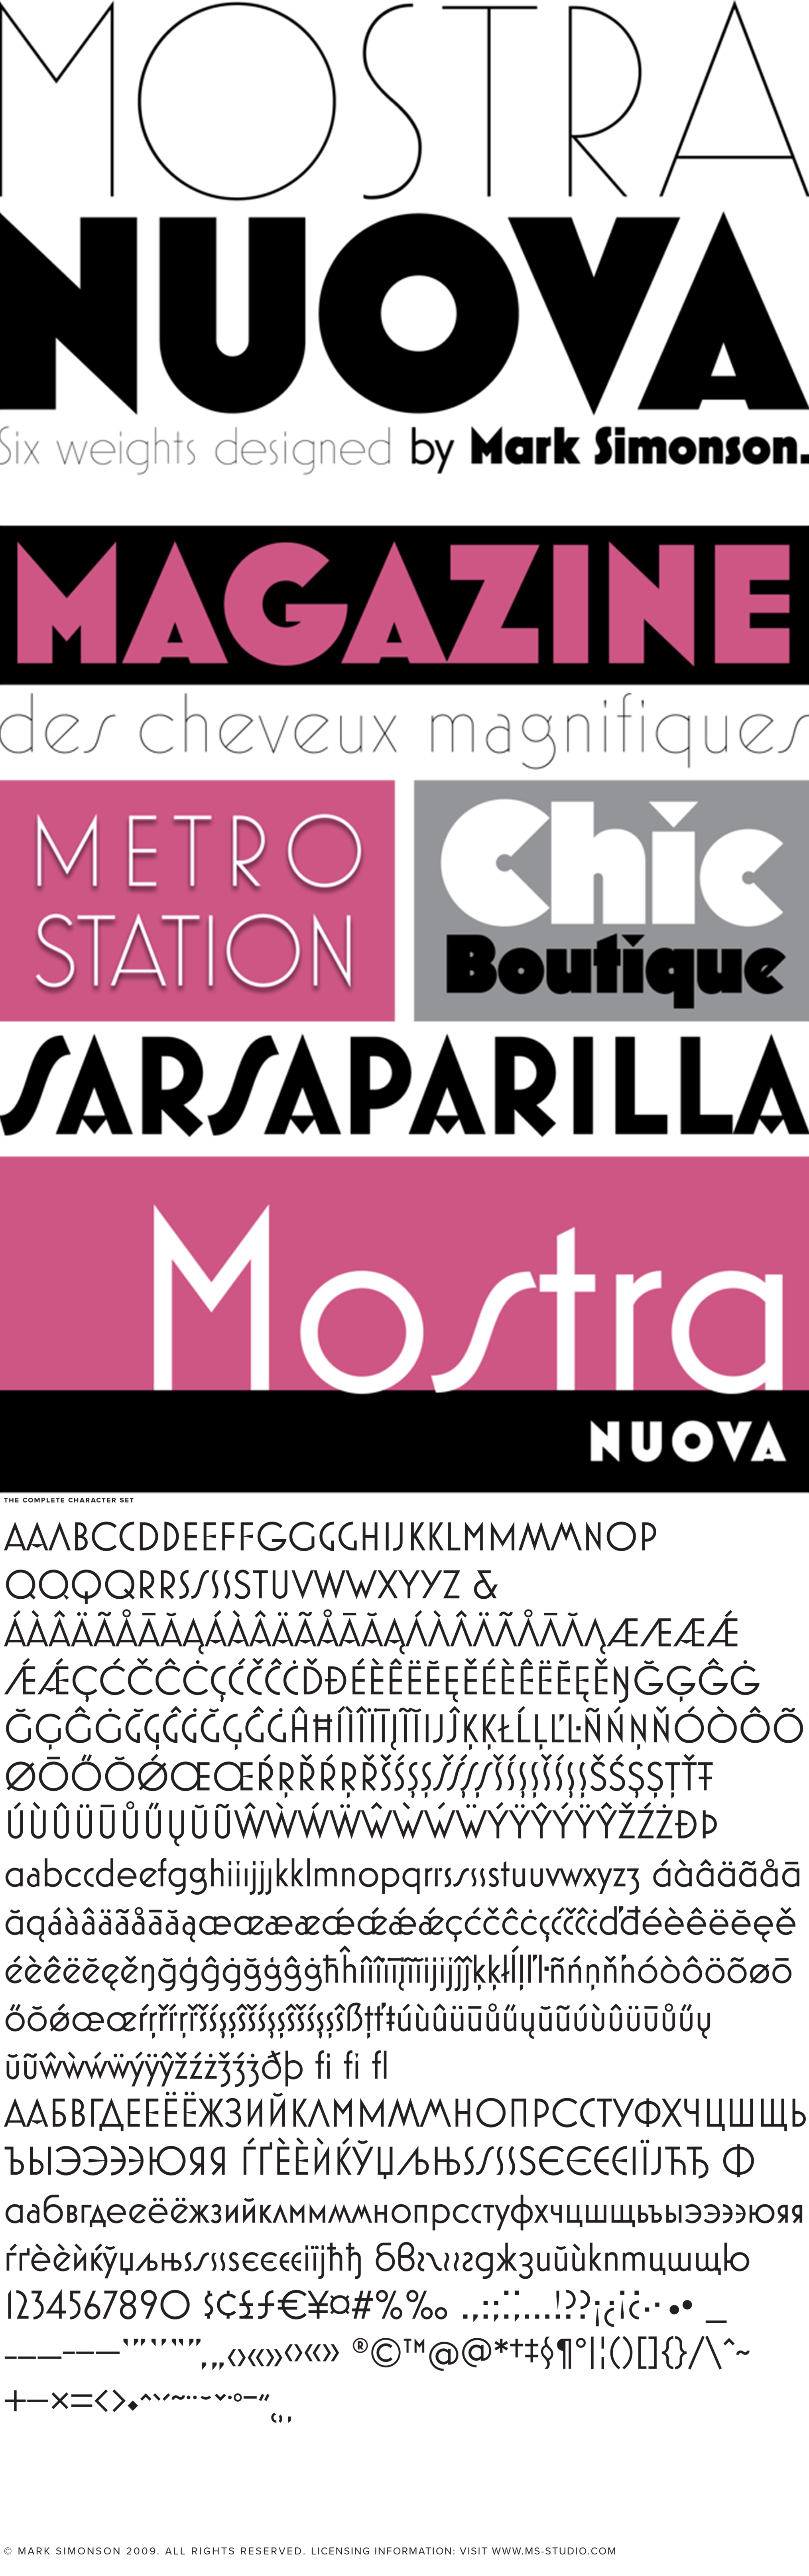 T 26 Digital Type Foundry Fonts Mostra Nuova